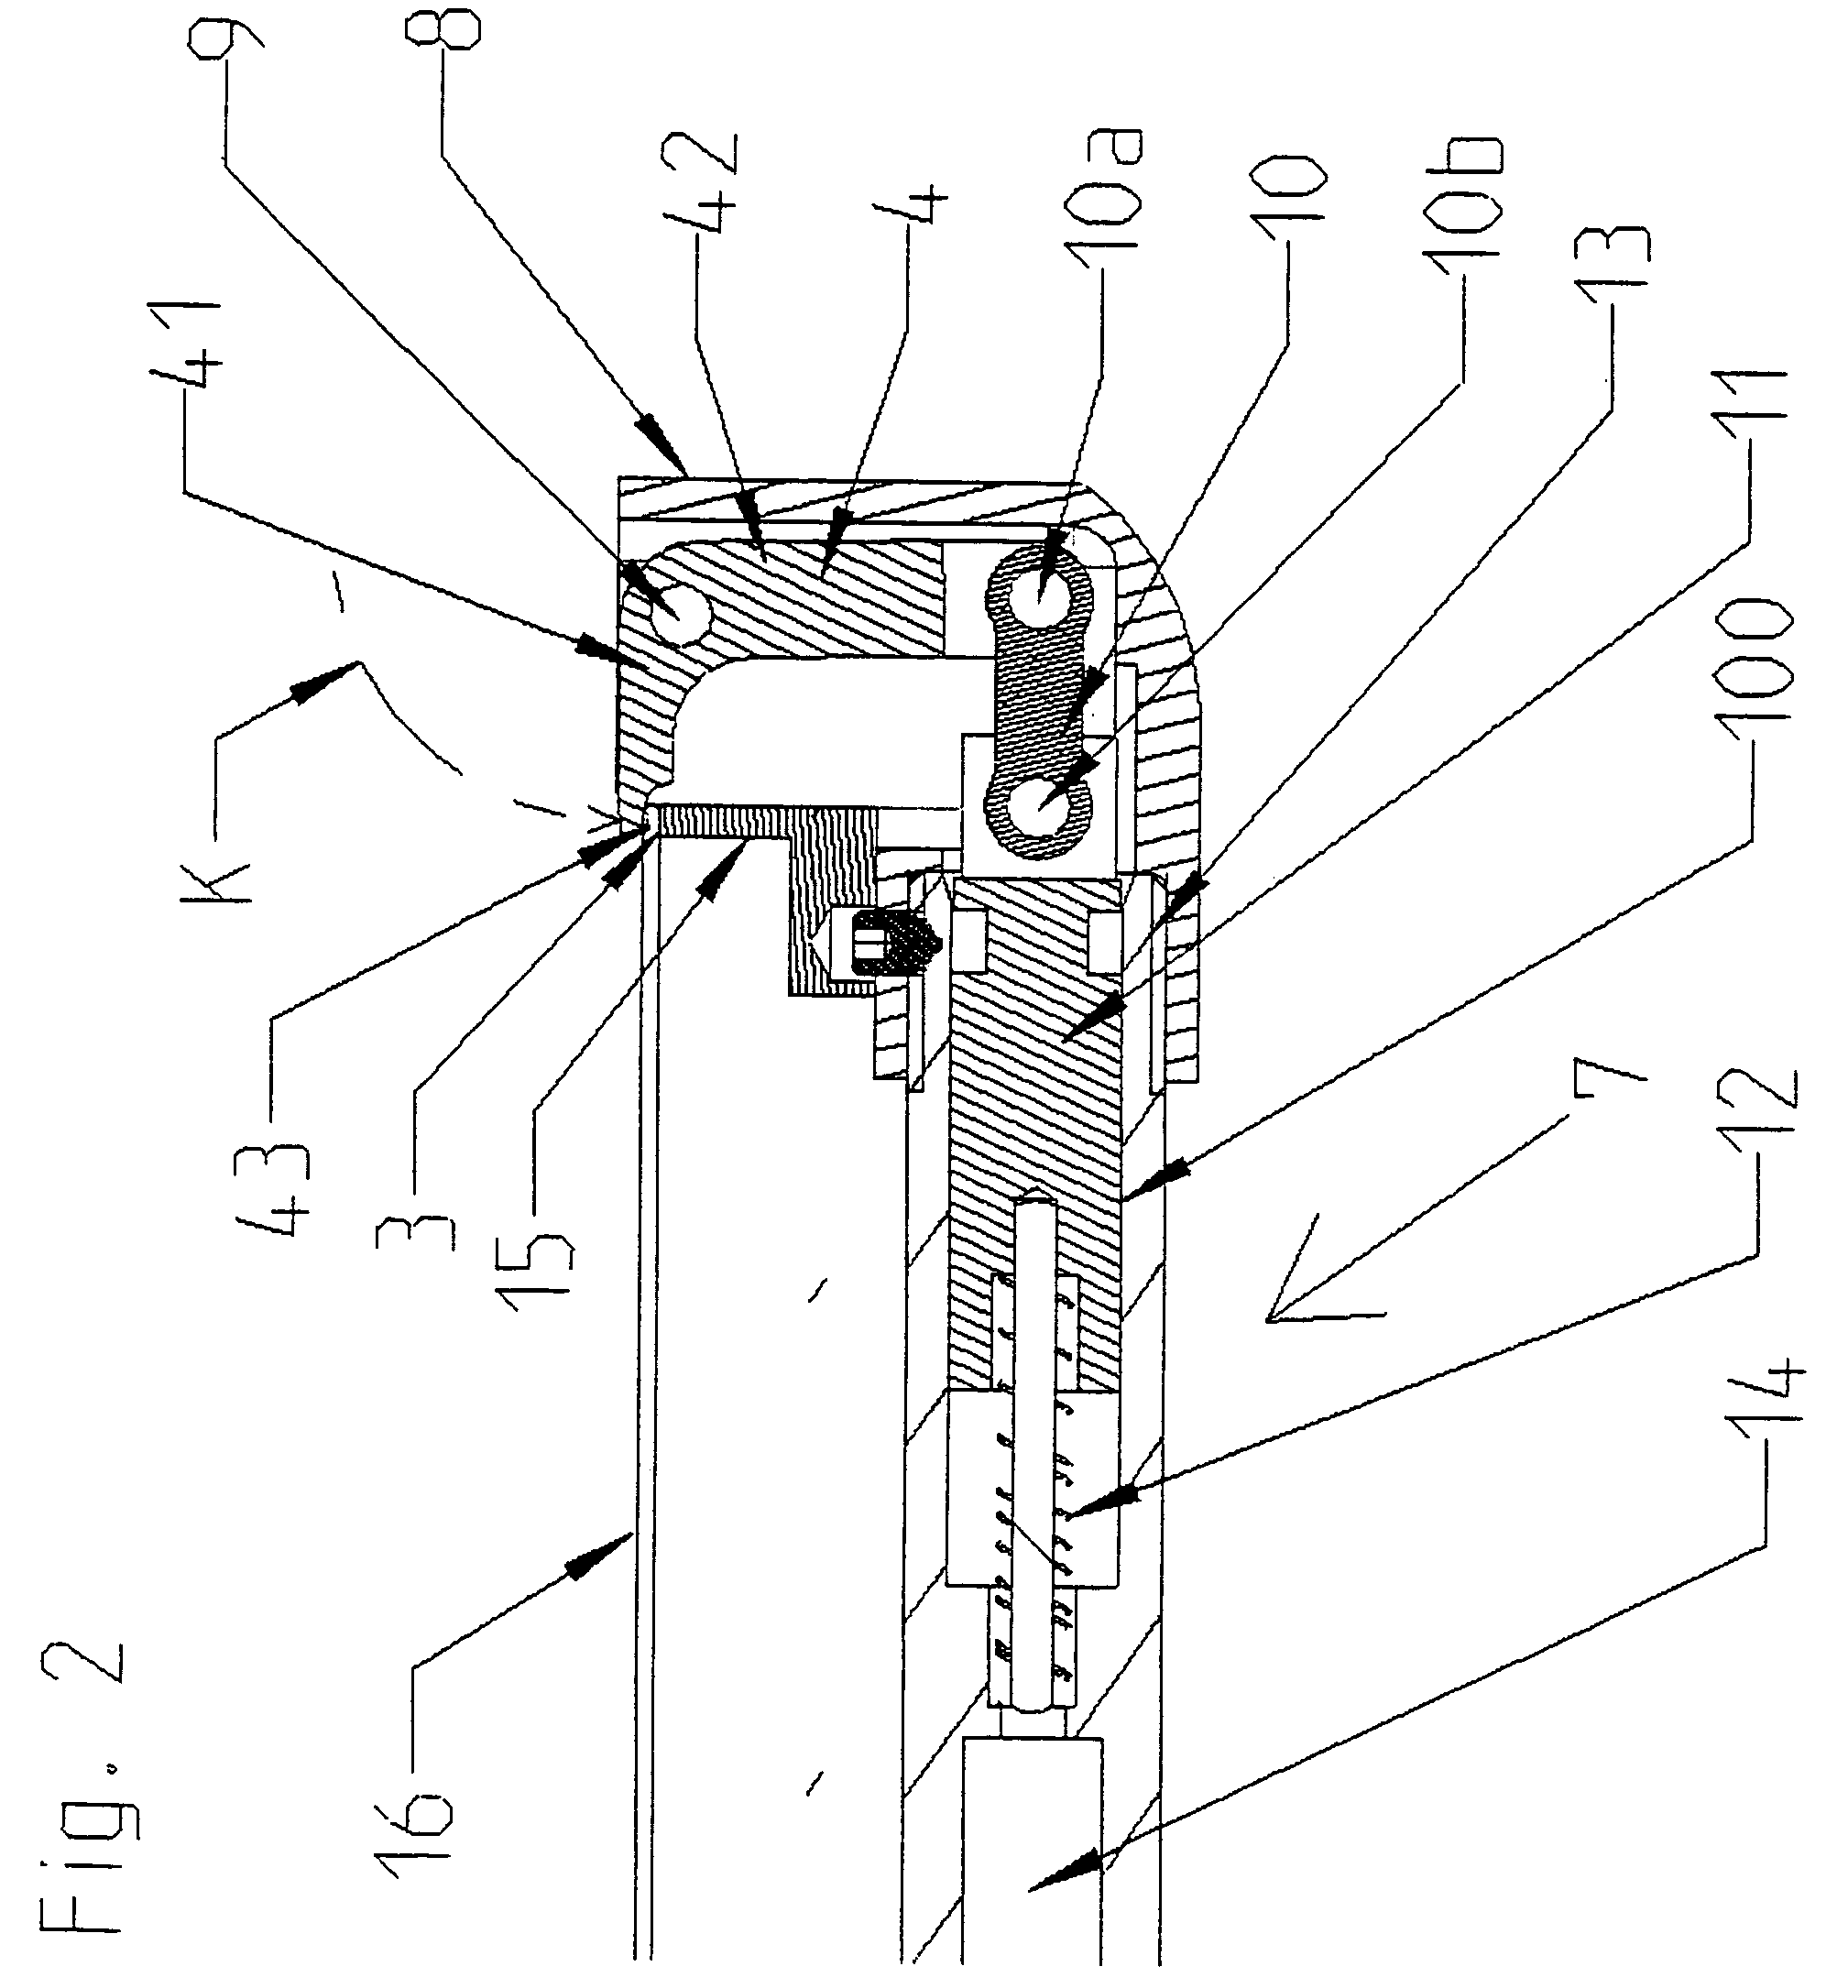 Holding device for disk-shaped objects